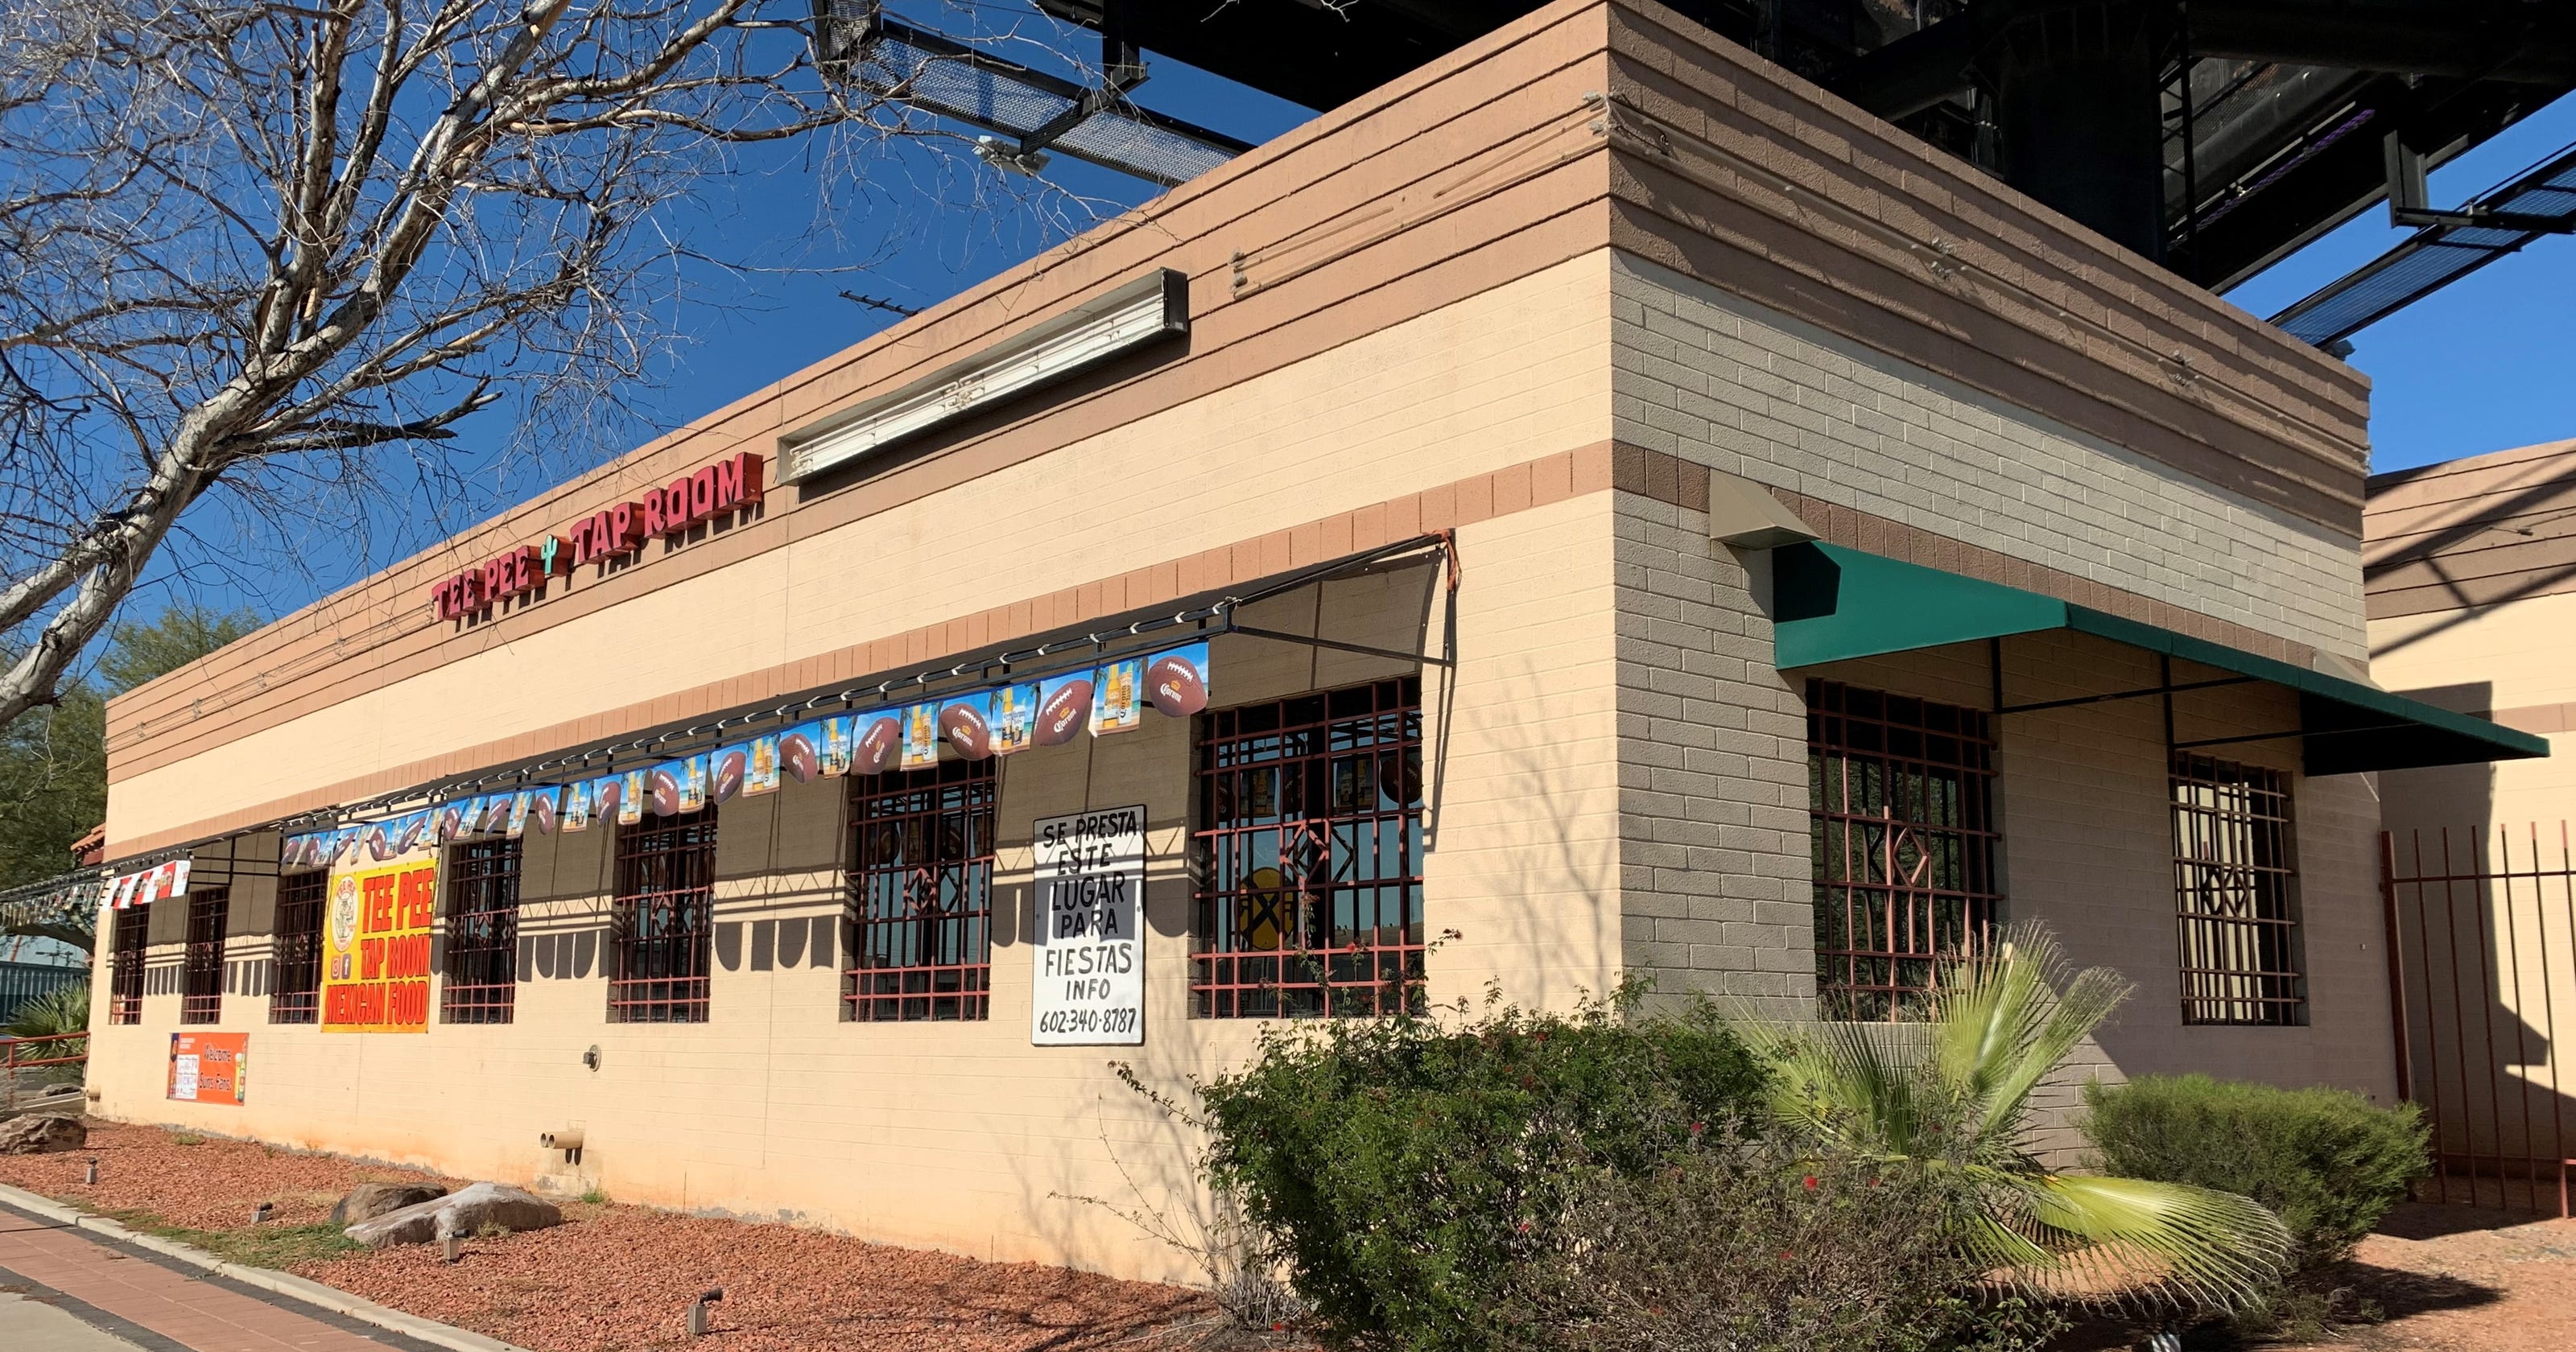 Mexican Restaurant Tee Pee Taproom Closes Near Chase Field